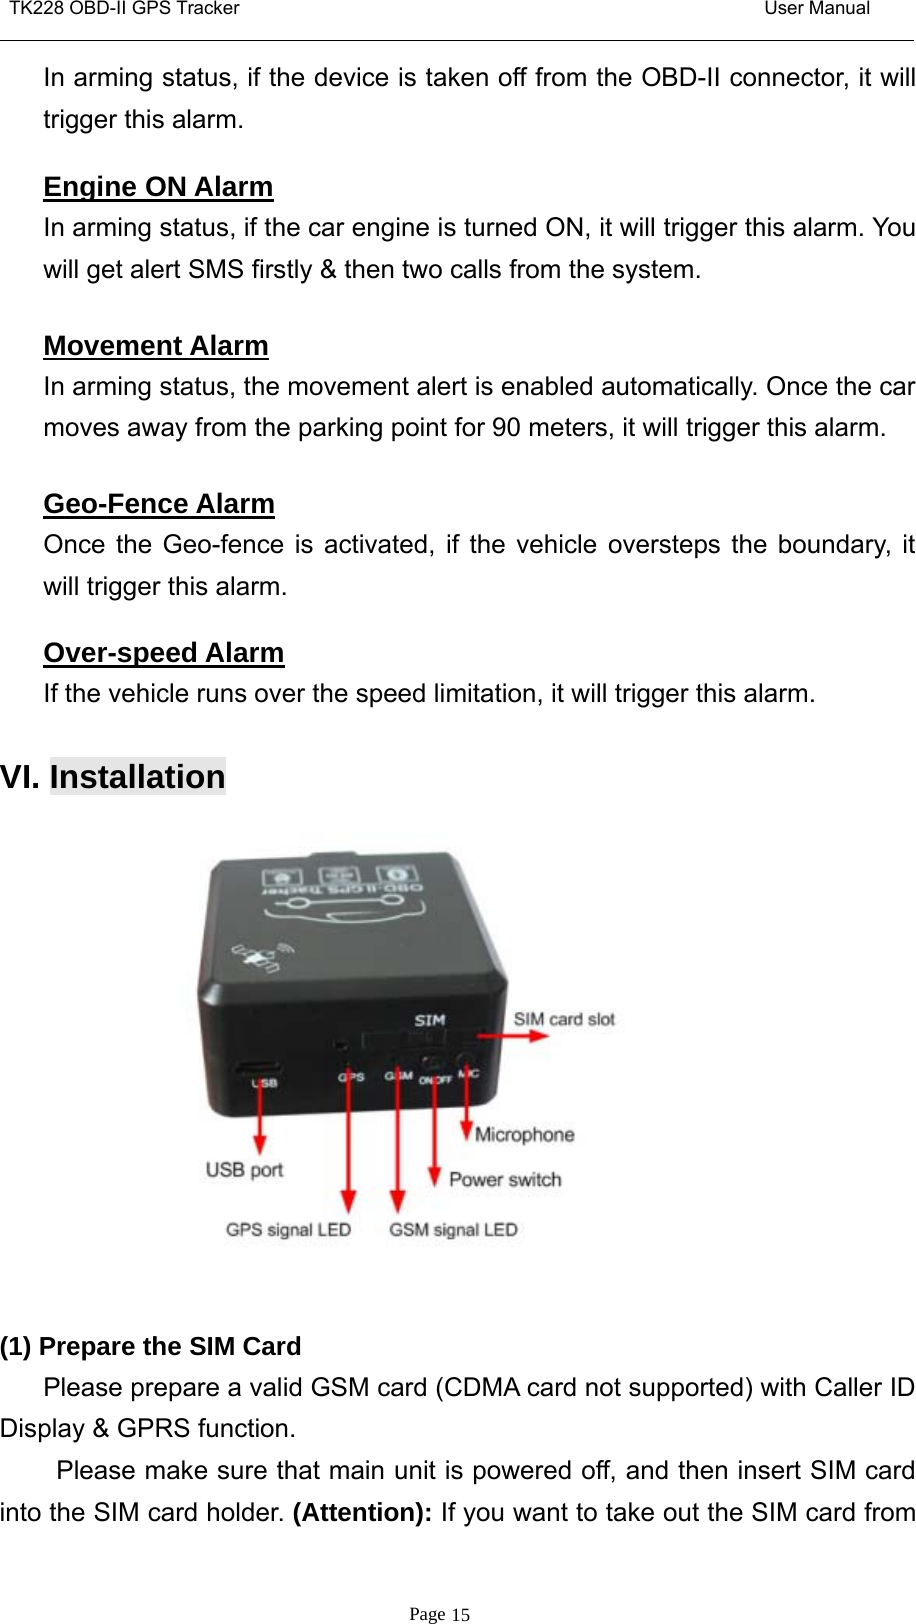 TK228 OBD-II GPS Tracker User ManualPage 15In arming status, if the device is taken off from the OBD-II connector, it willtrigger this alarm.Engine ON AlarmIn arming status, if the car engine is turned ON, it will trigger this alarm. Youwill get alert SMS firstly &amp; then two calls from the system.Movement AlarmIn arming status, the movement alert is enabled automatically. Once the carmoves away from the parking point for 90 meters, it will trigger this alarm.Geo-Fence AlarmOnce the Geo-fence is activated, if the vehicle oversteps the boundary, itwill trigger this alarm.Over-speed AlarmIf the vehicle runs over the speed limitation, it will trigger this alarm.VI. Installation(1) Prepare the SIM CardPlease prepare a valid GSM card (CDMA card not supported) with Caller IDDisplay &amp; GPRS function.Please make sure that main unit is powered off, and then insert SIM cardinto the SIM card holder. (Attention): If you want to take out the SIM card from